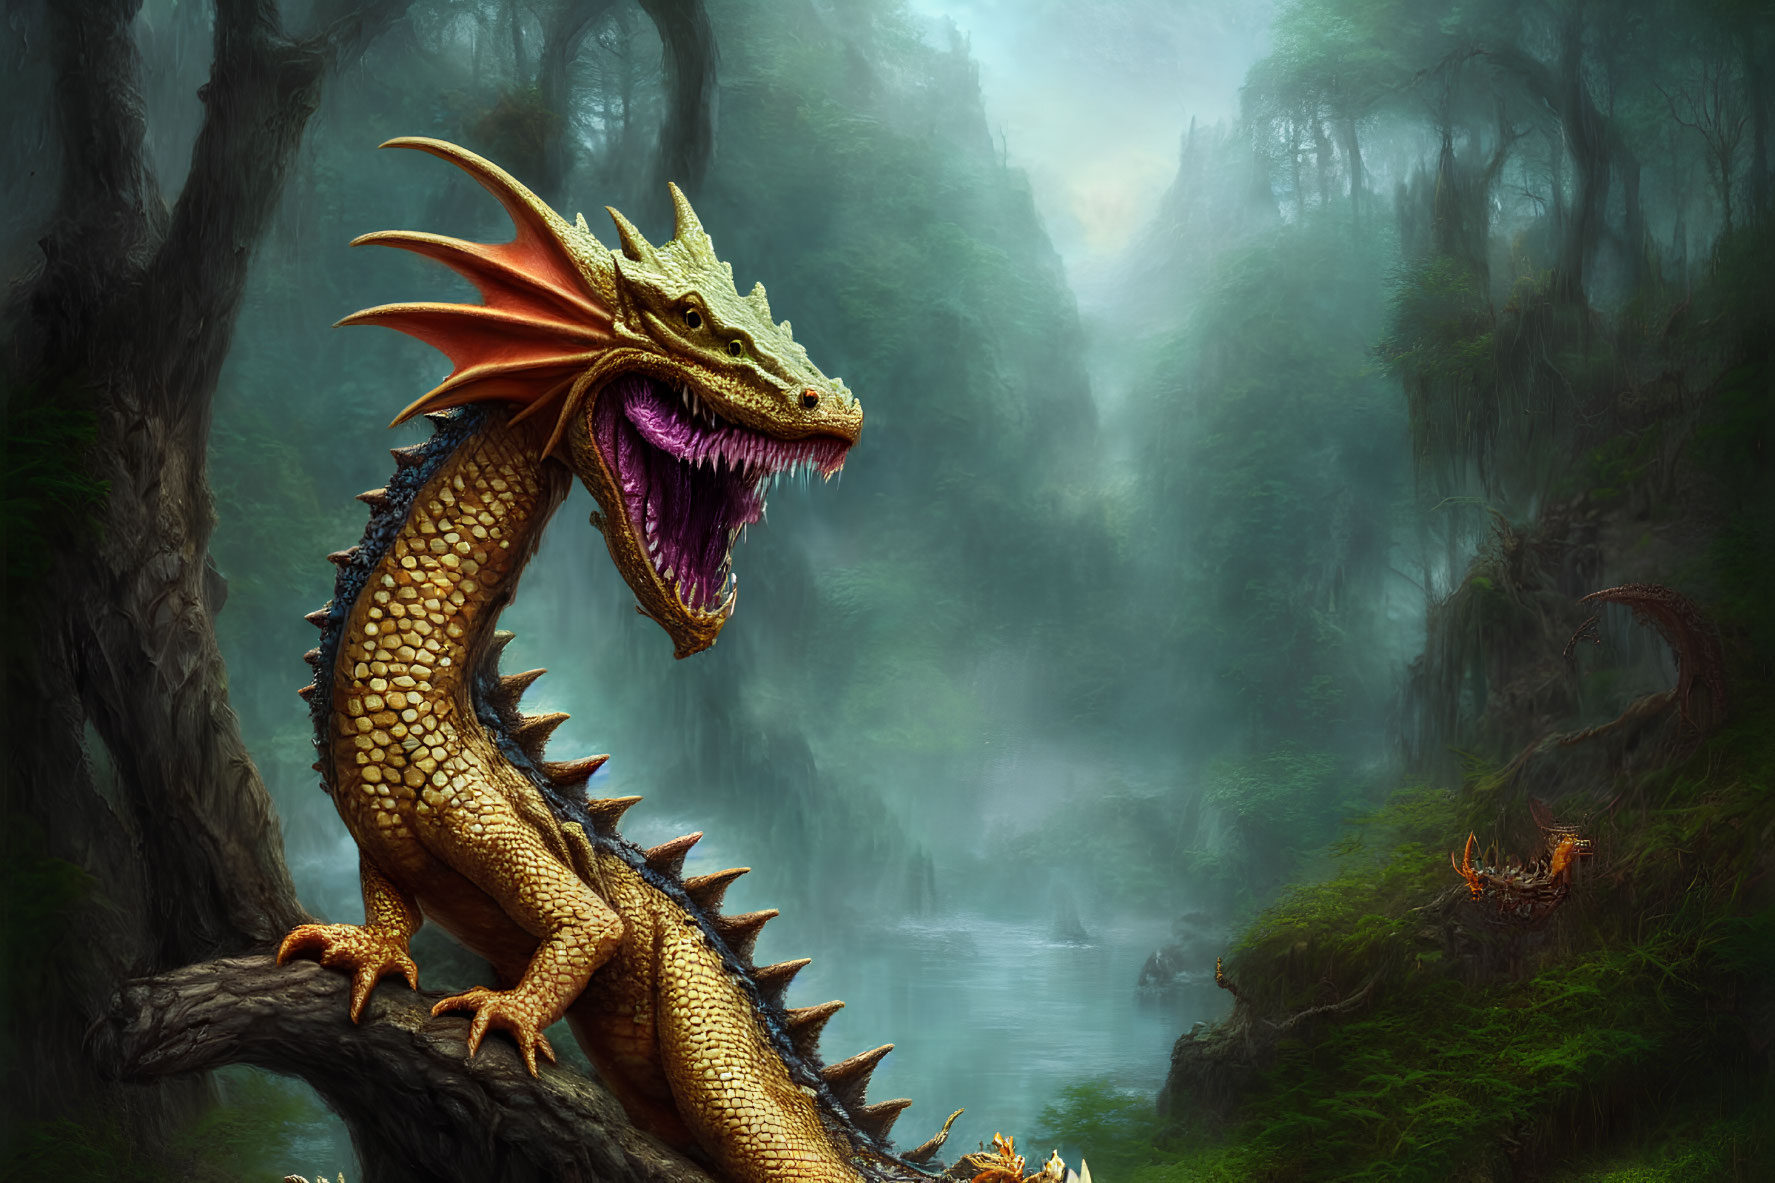 Golden dragon perched on tree in misty forest with river and smaller dragons.